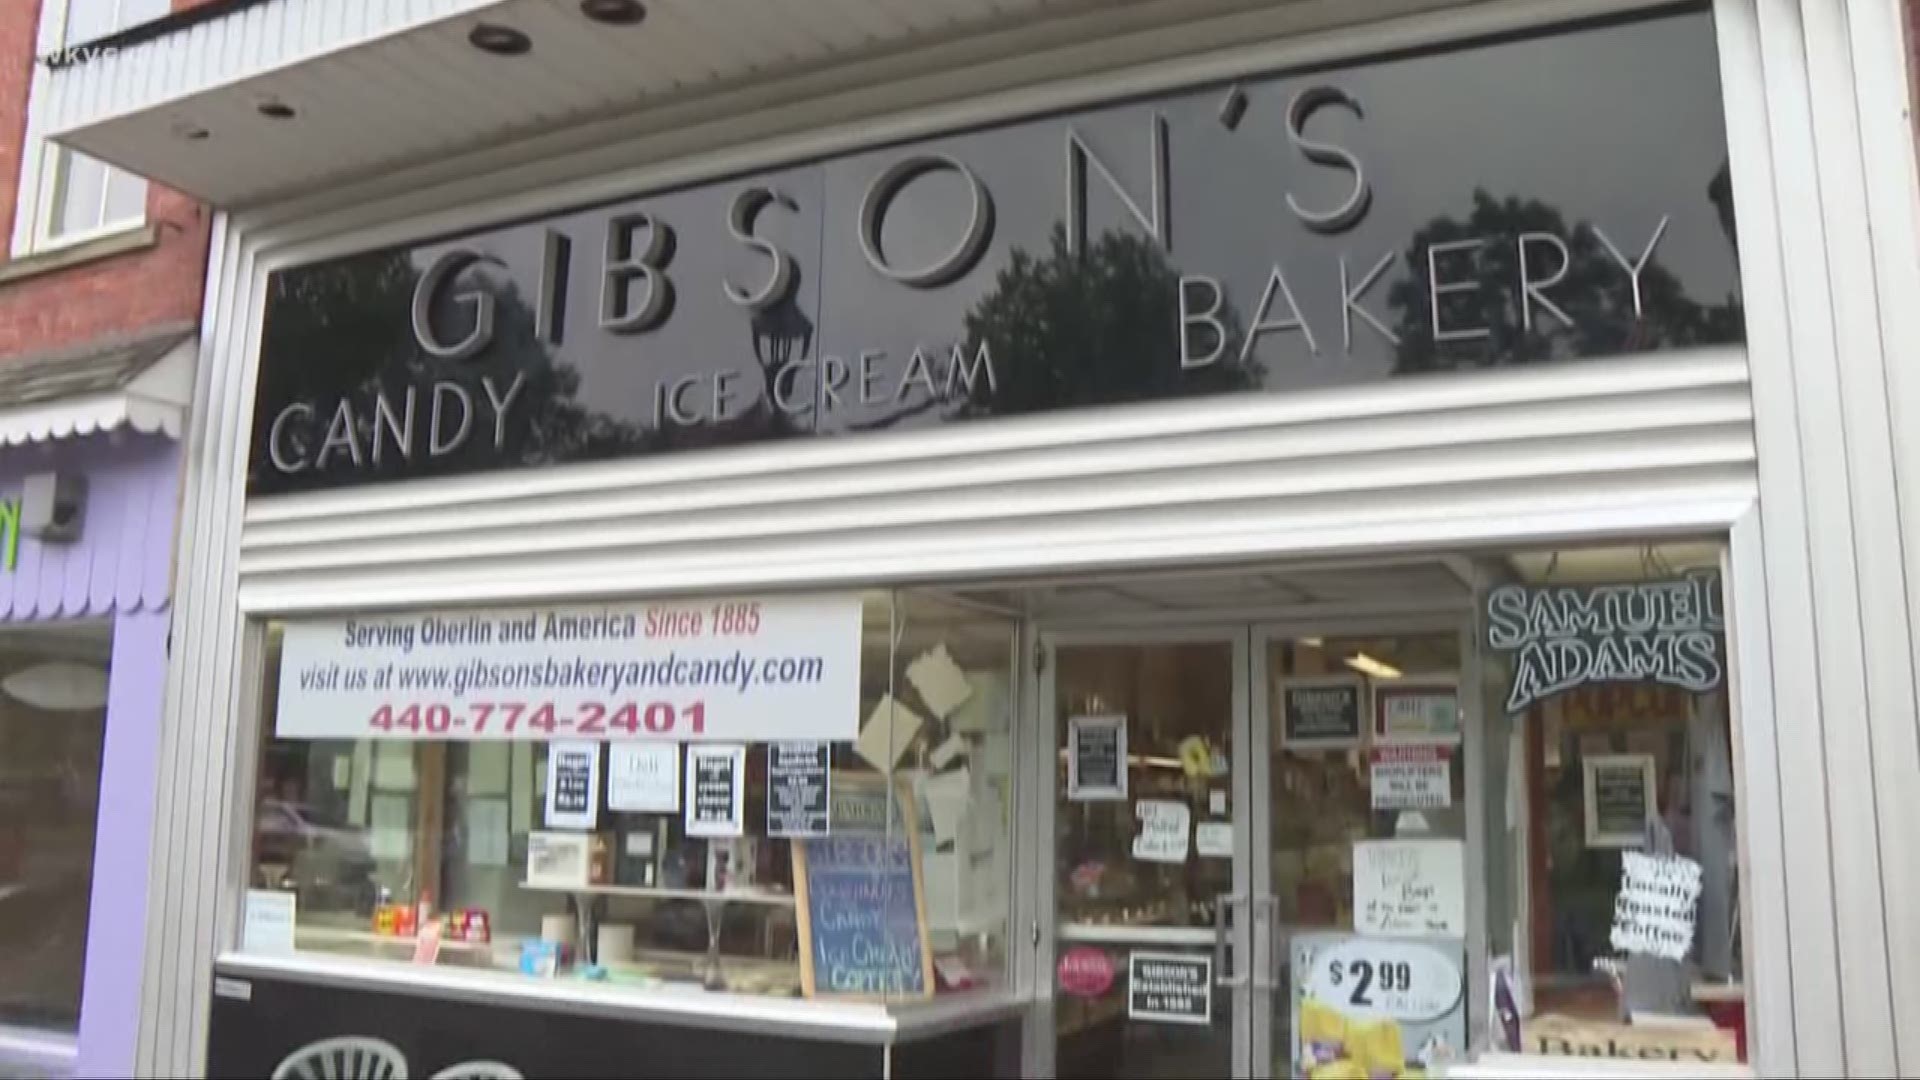 A jury awarded Gibson's $44 million dollars in a libel case against Oberlin College last week